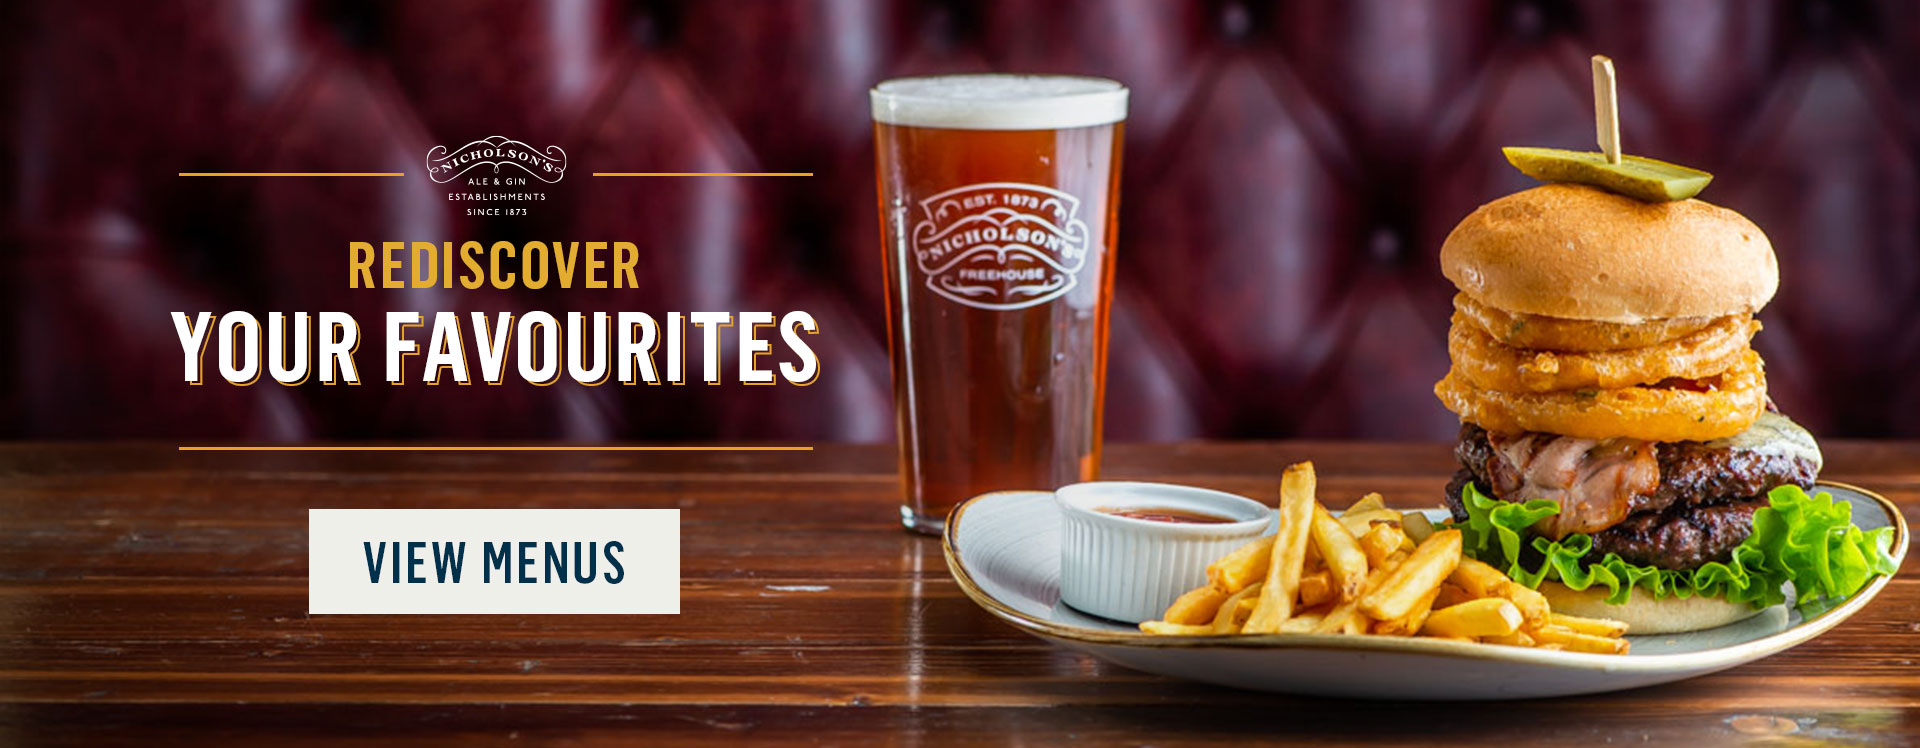 Rediscover your favourites at The Argyll Arms